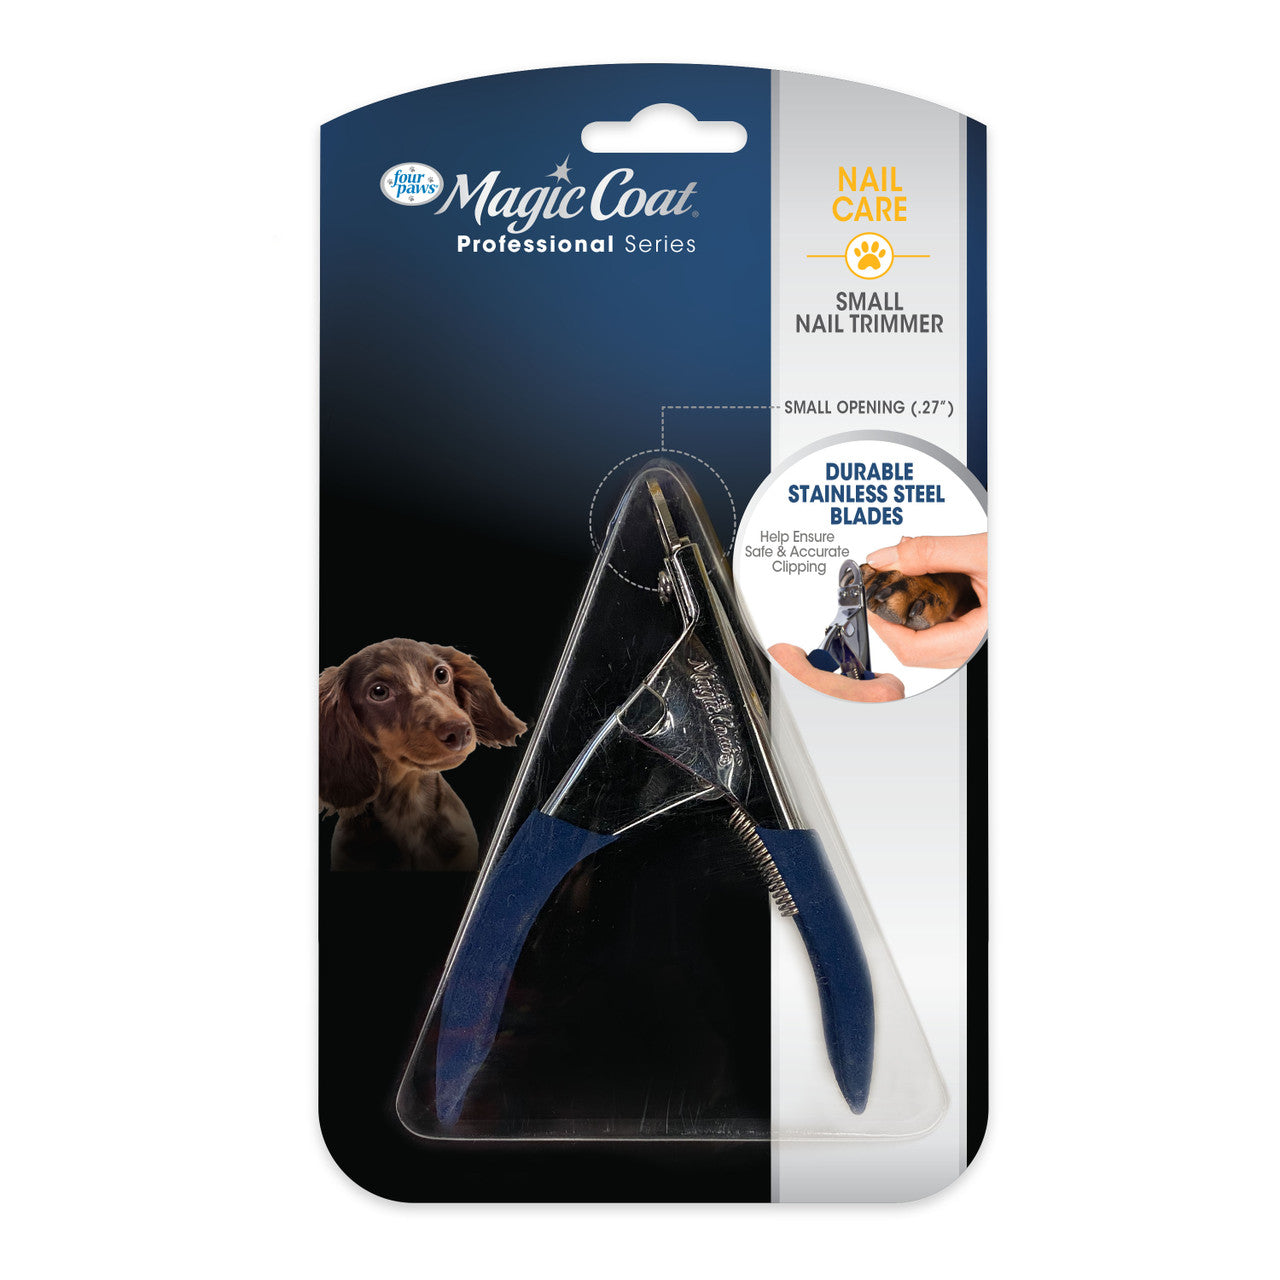 Four Paws Magic Coat Professional Series Nail Trimmer for Dogs Small